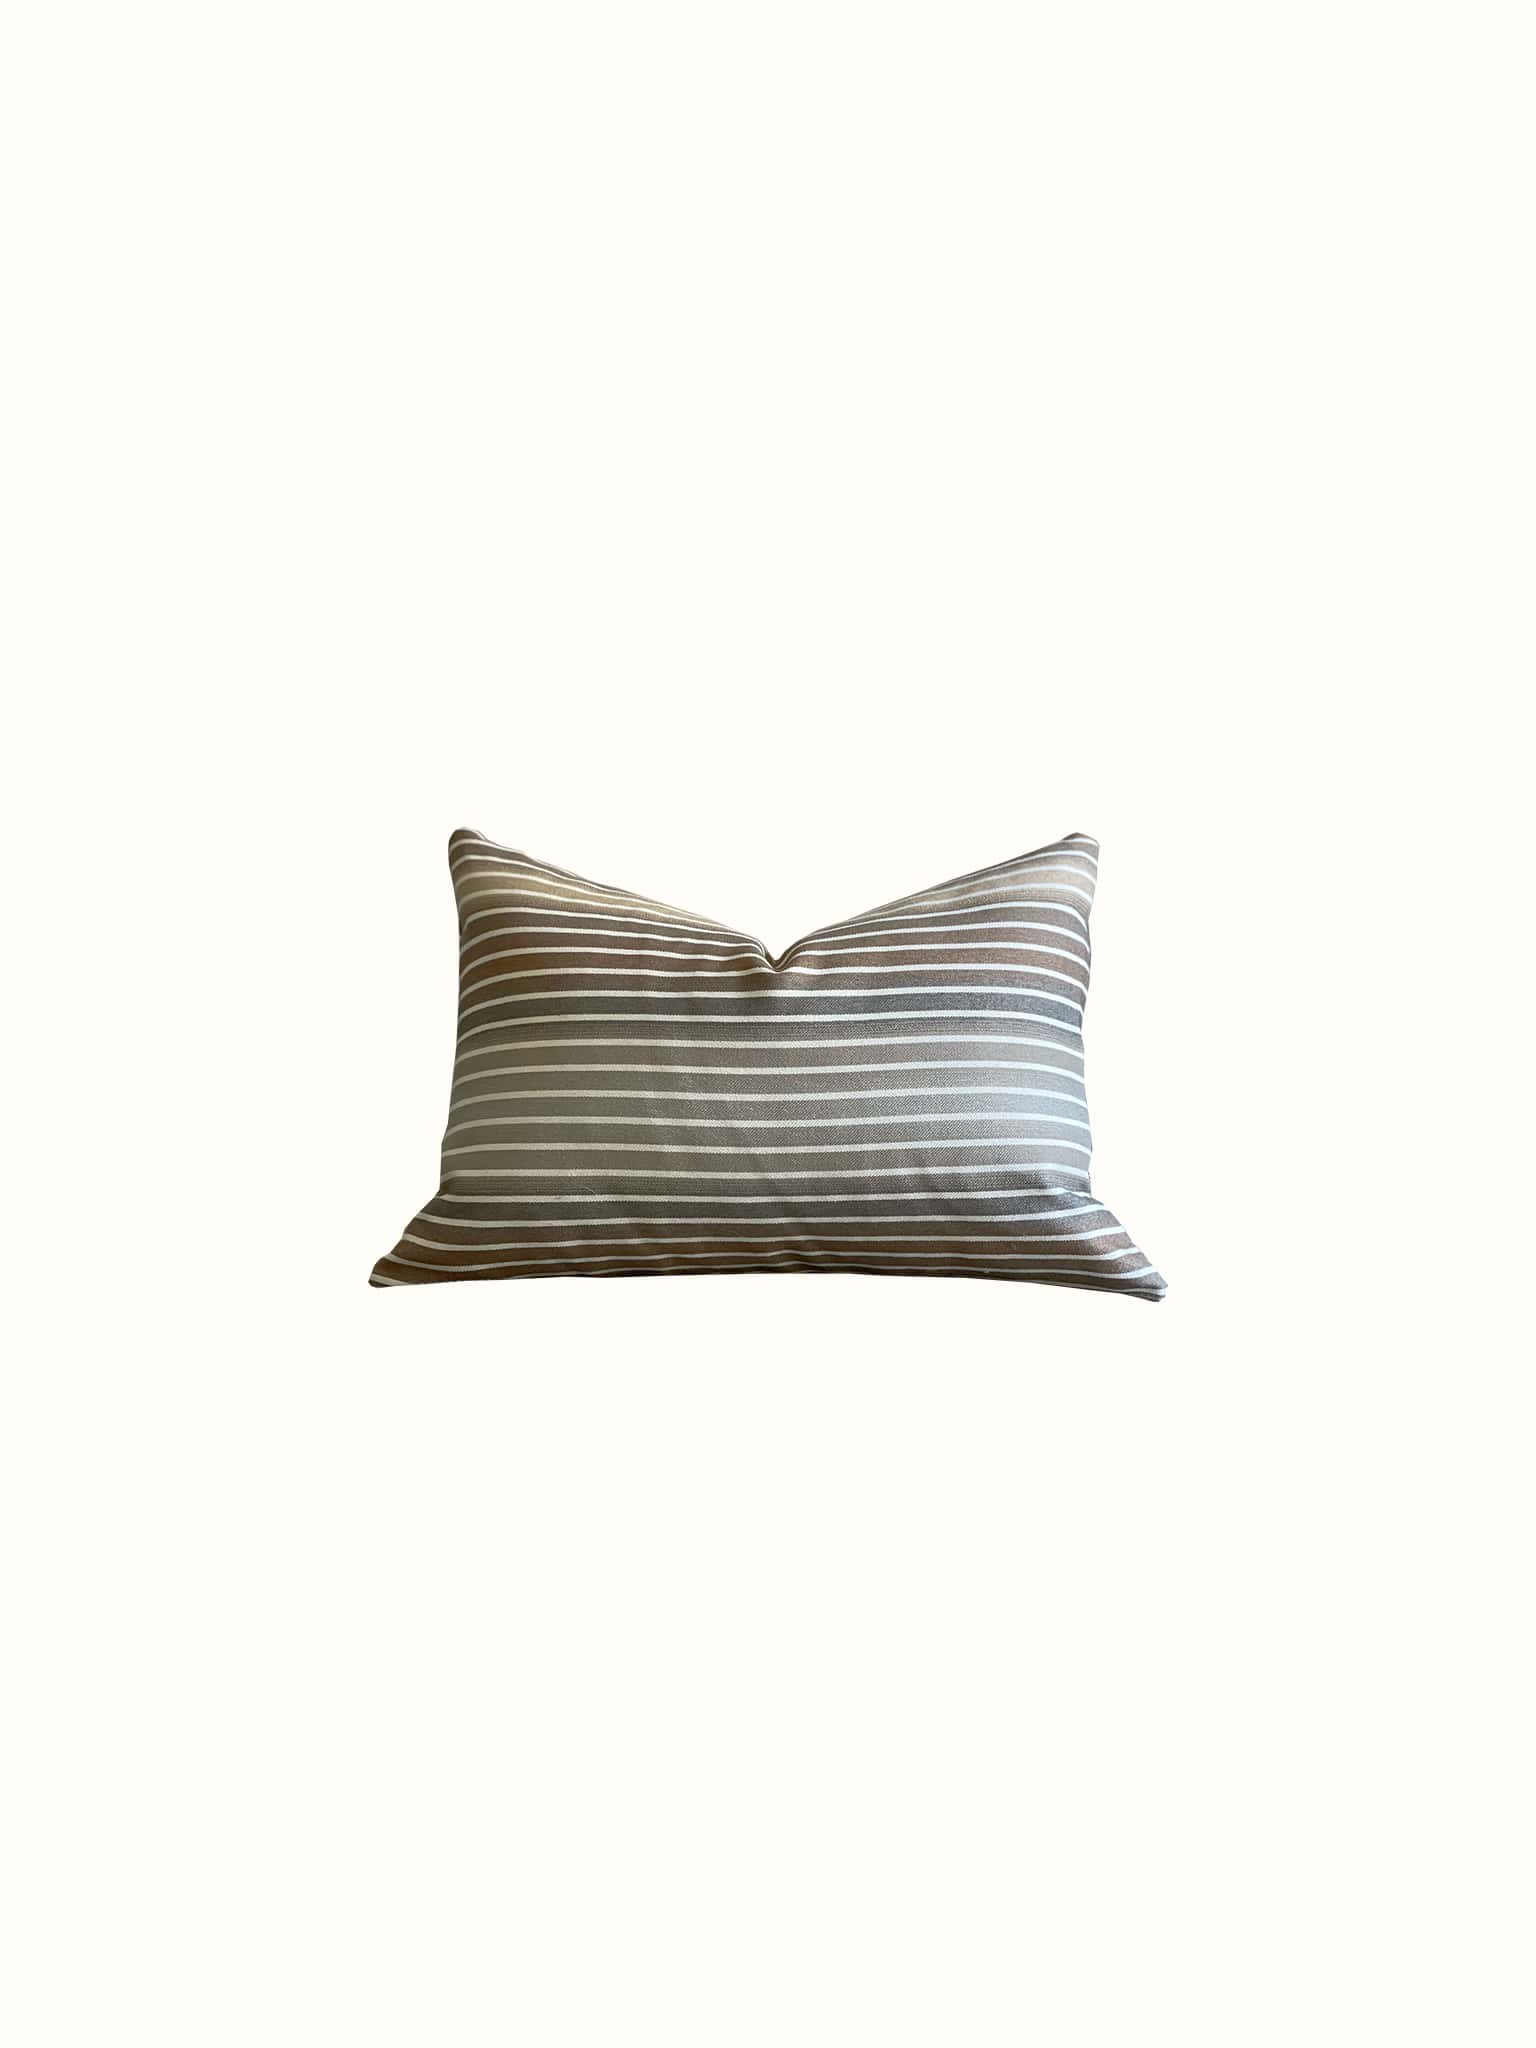 A striped lumbar pillow in brown earthy toned gradience pattern gives an ultimate modern flair at Cielle Home